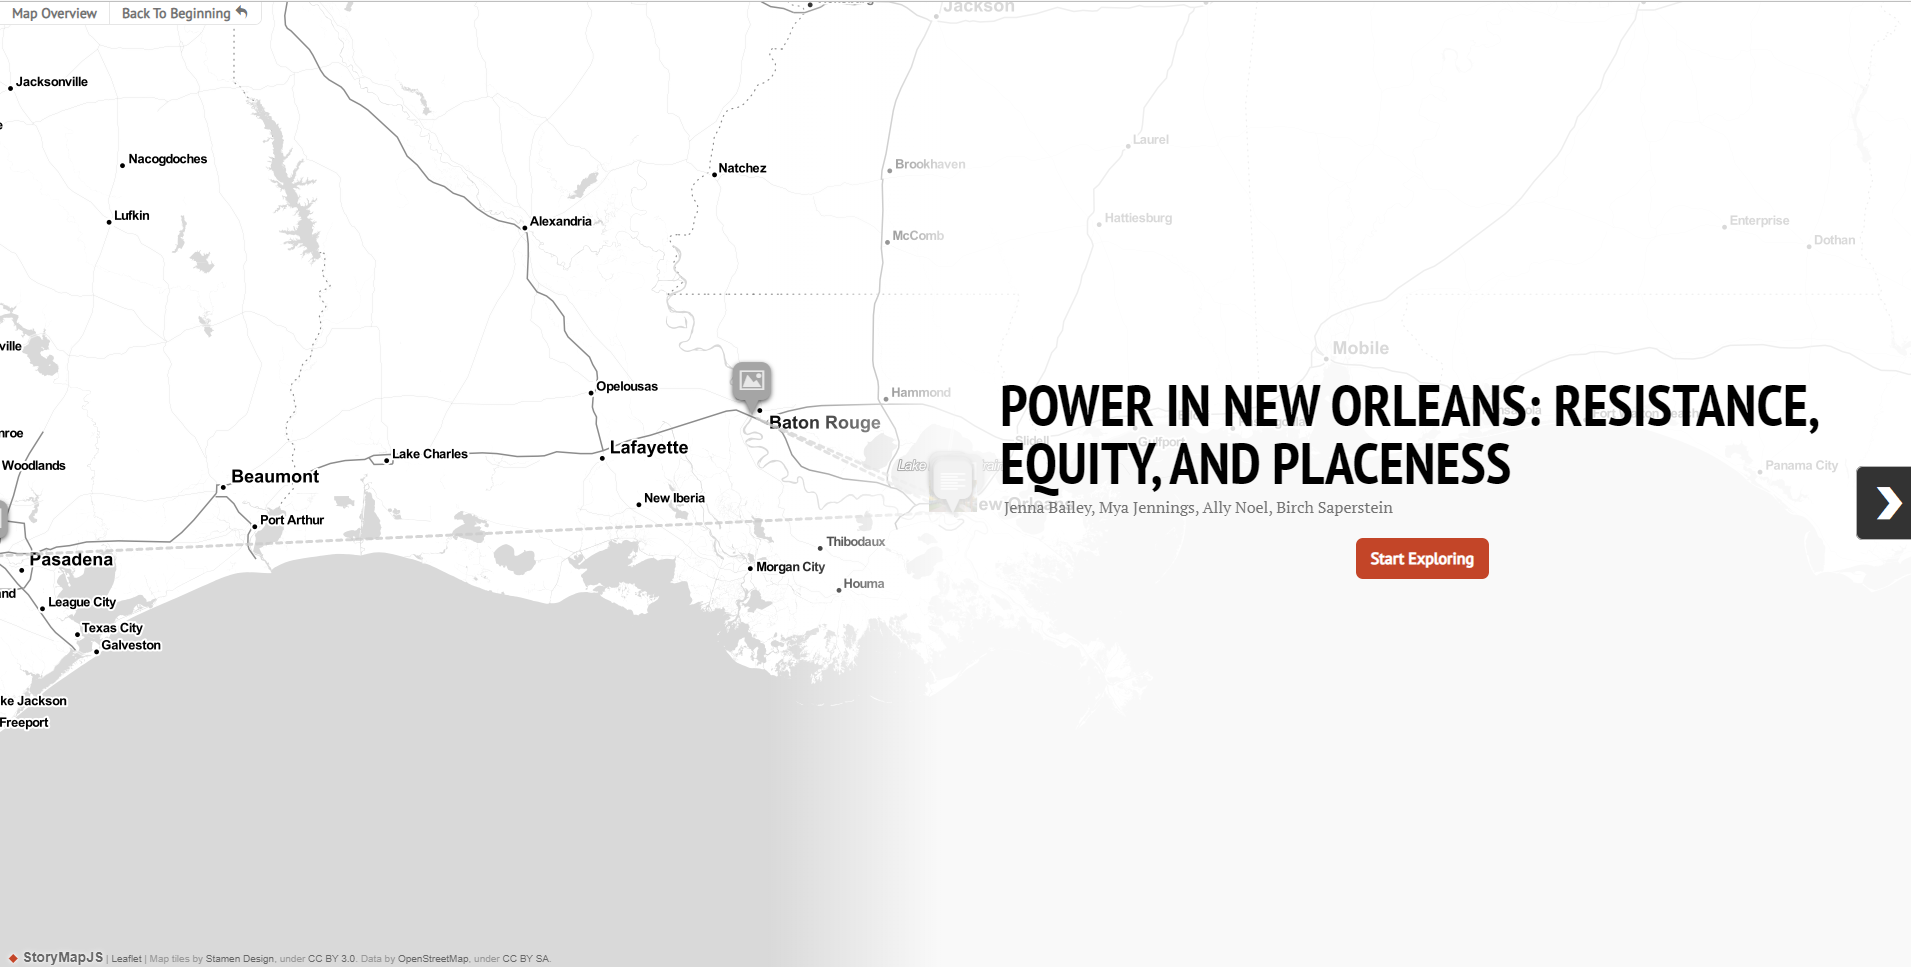 Power in New Orleans